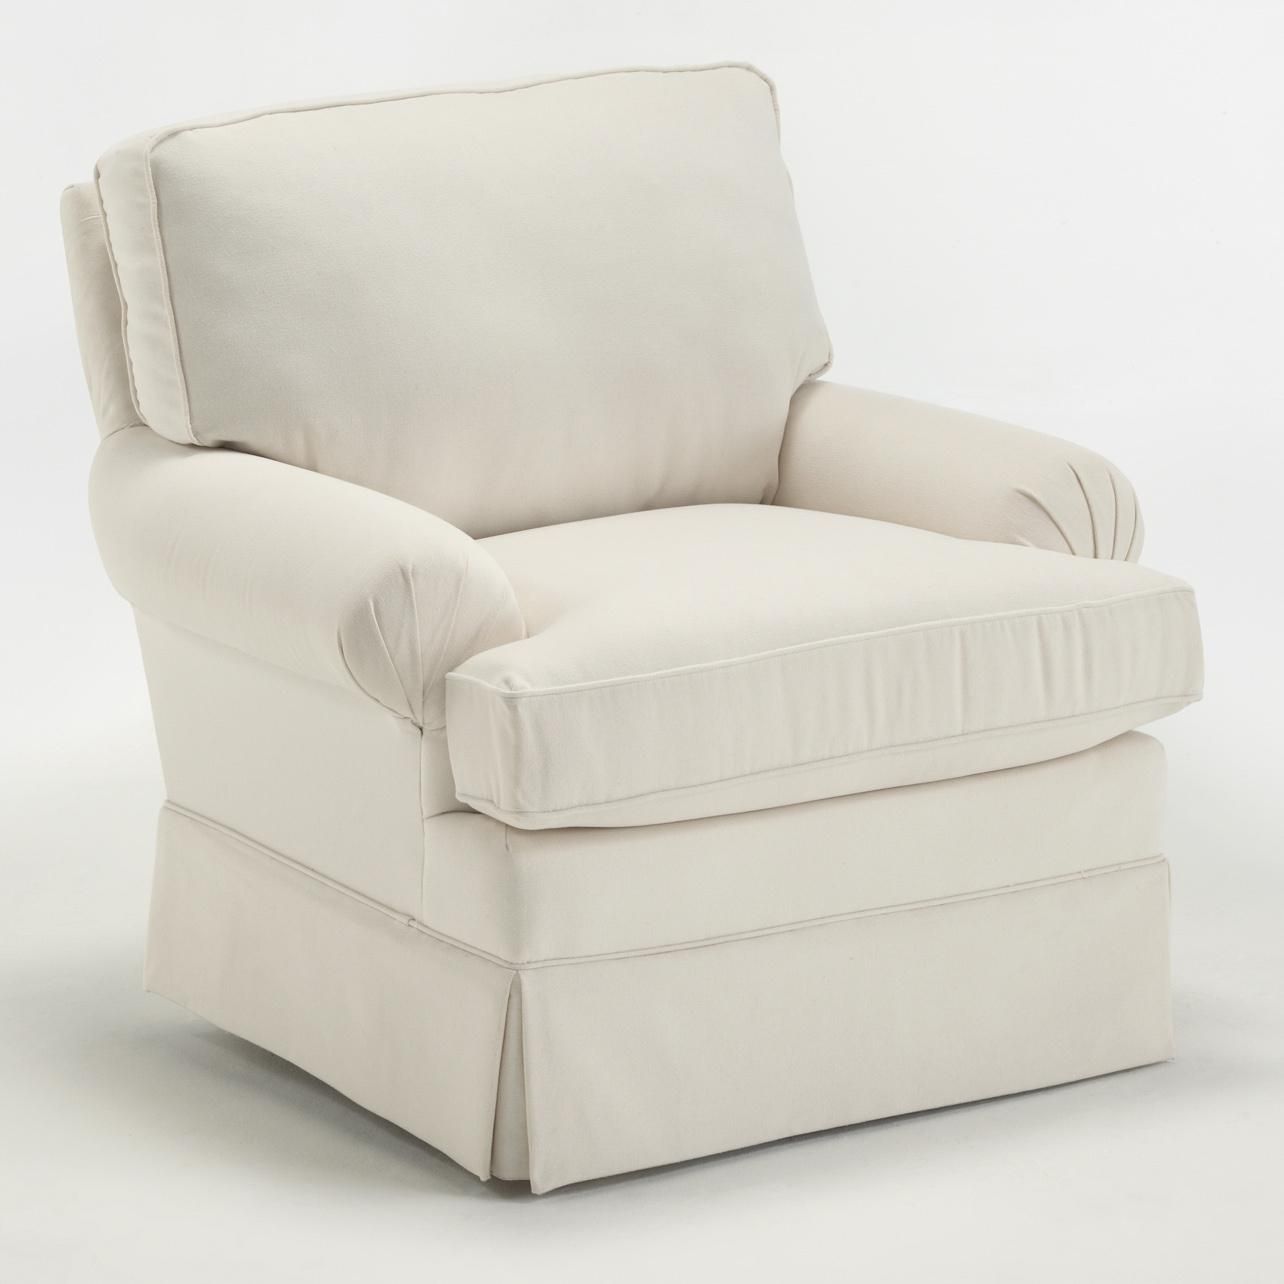 Best Home Furnishings Kamilla Kamilla Swivel Glider With Skirted Intended For Swivel Rocking Chairs (View 13 of 15)